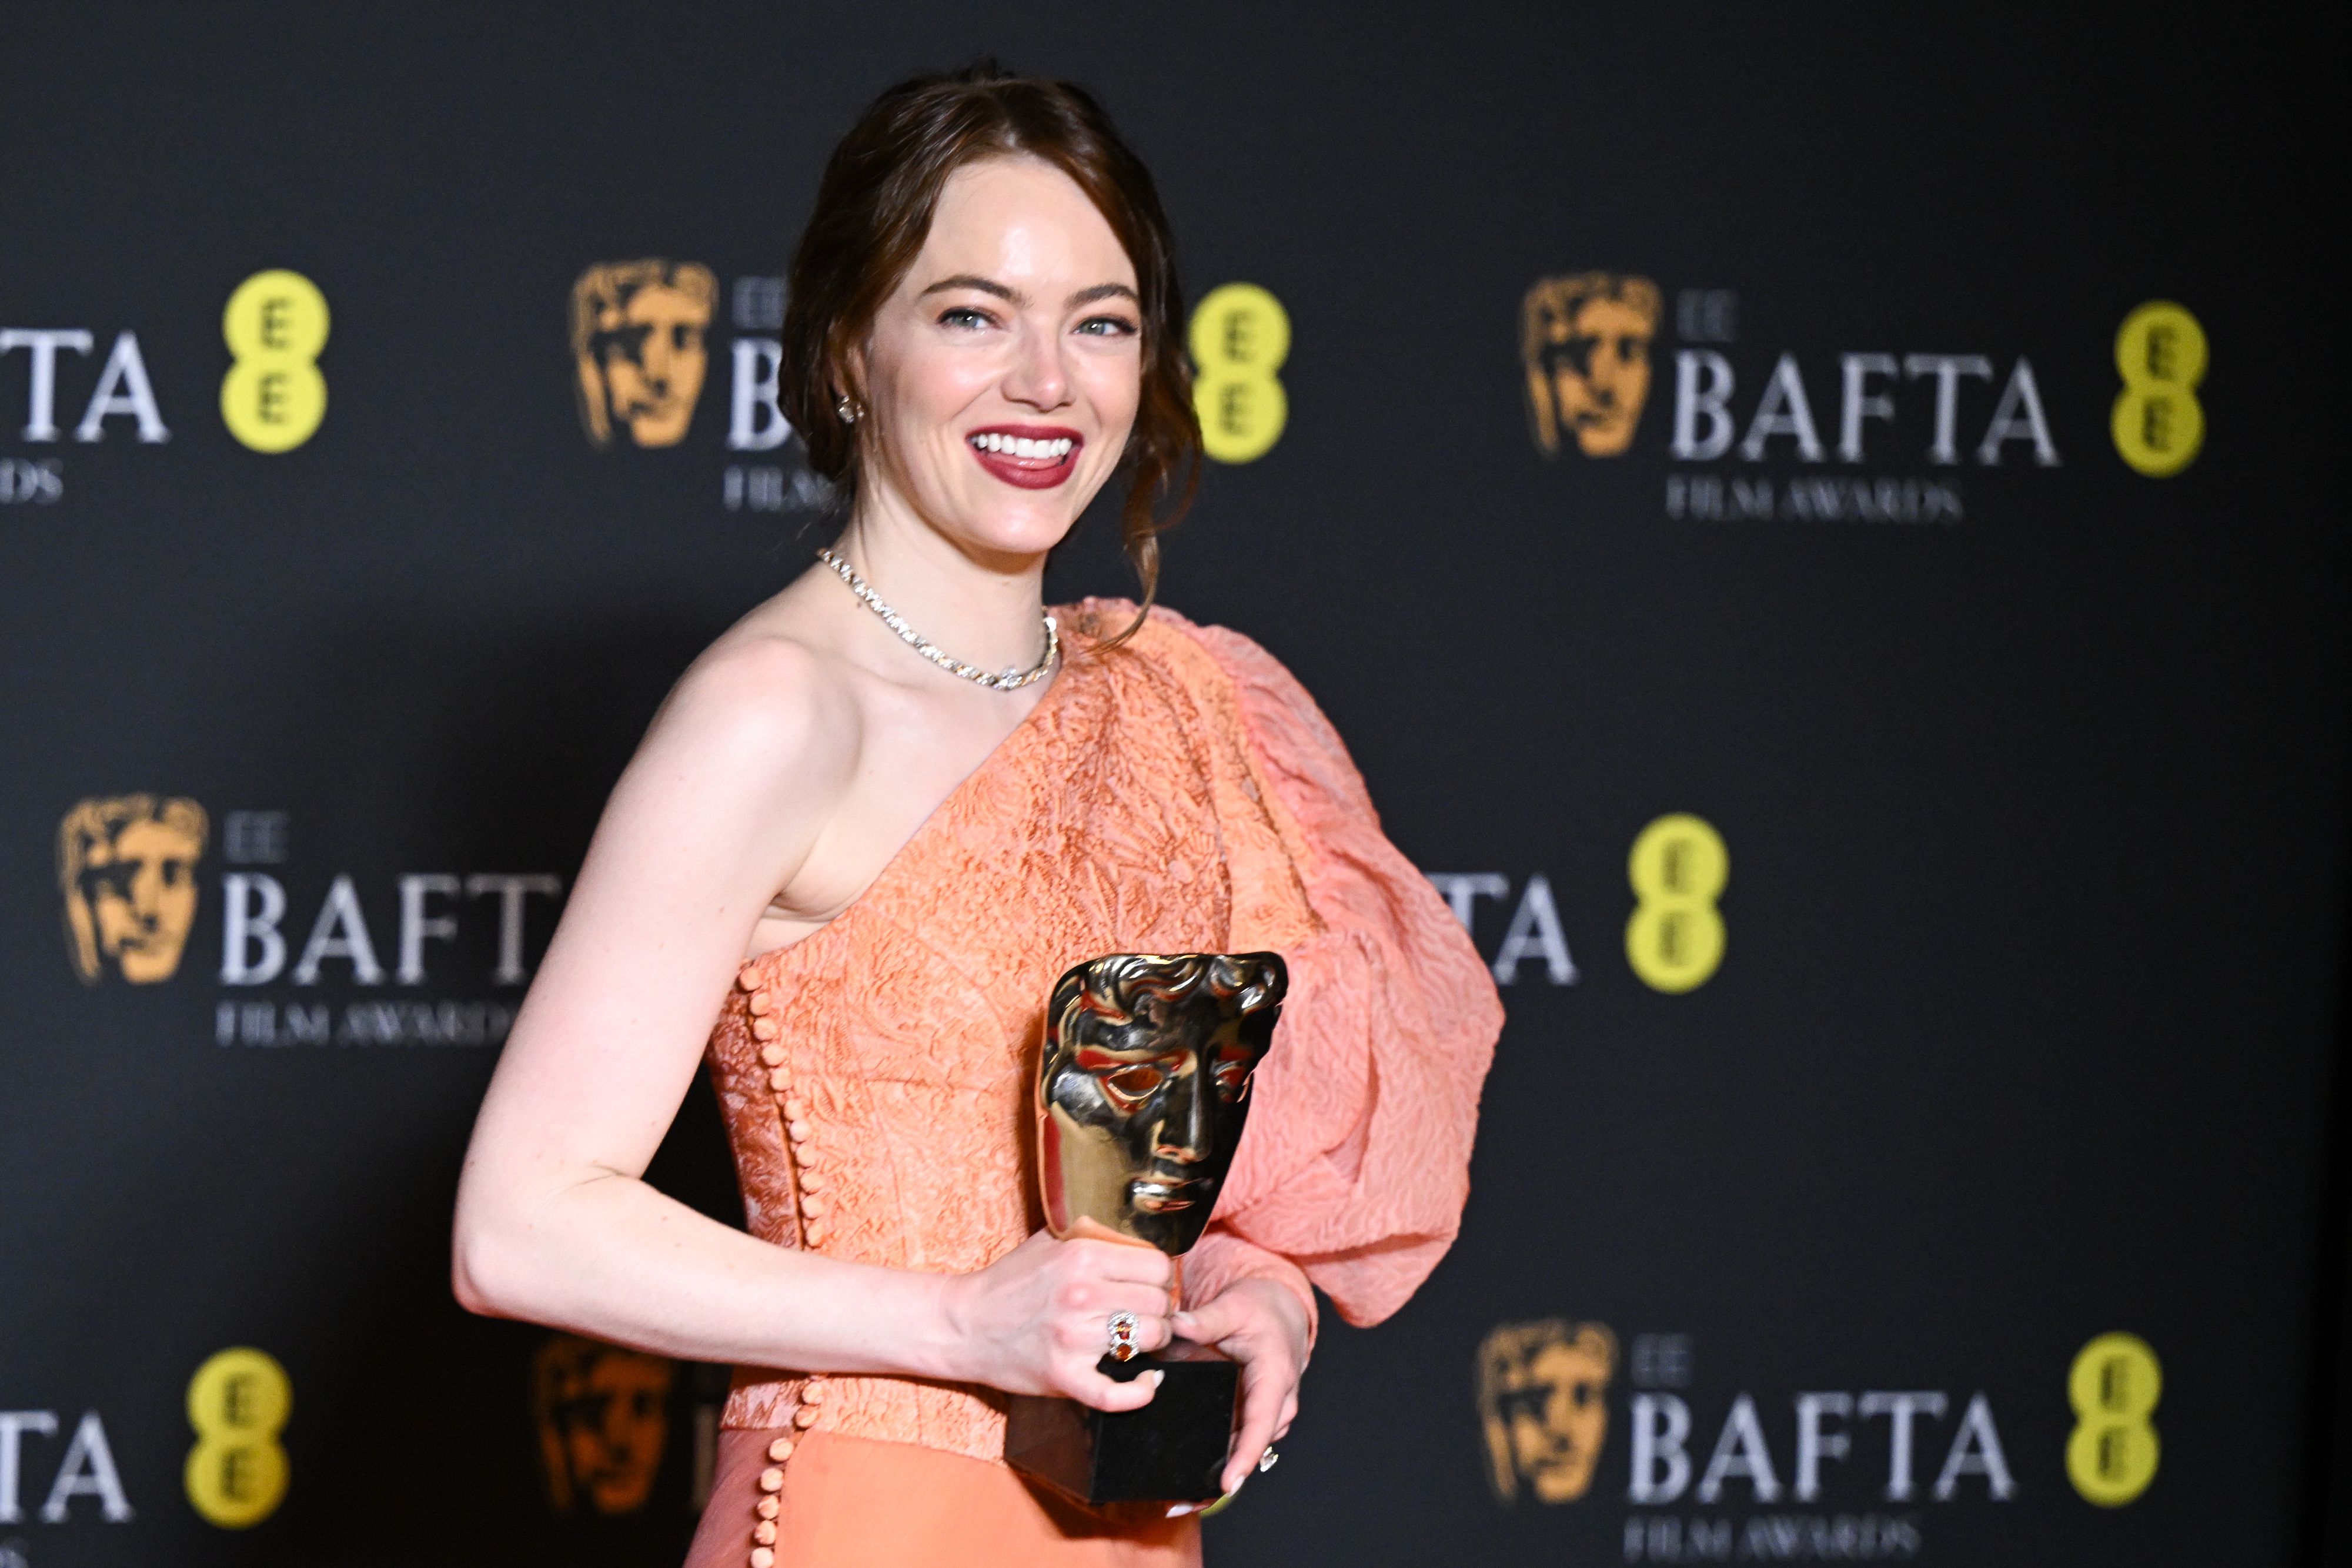 Emma Stone posing with her BAFTA award while wearing a one-shoulder dress